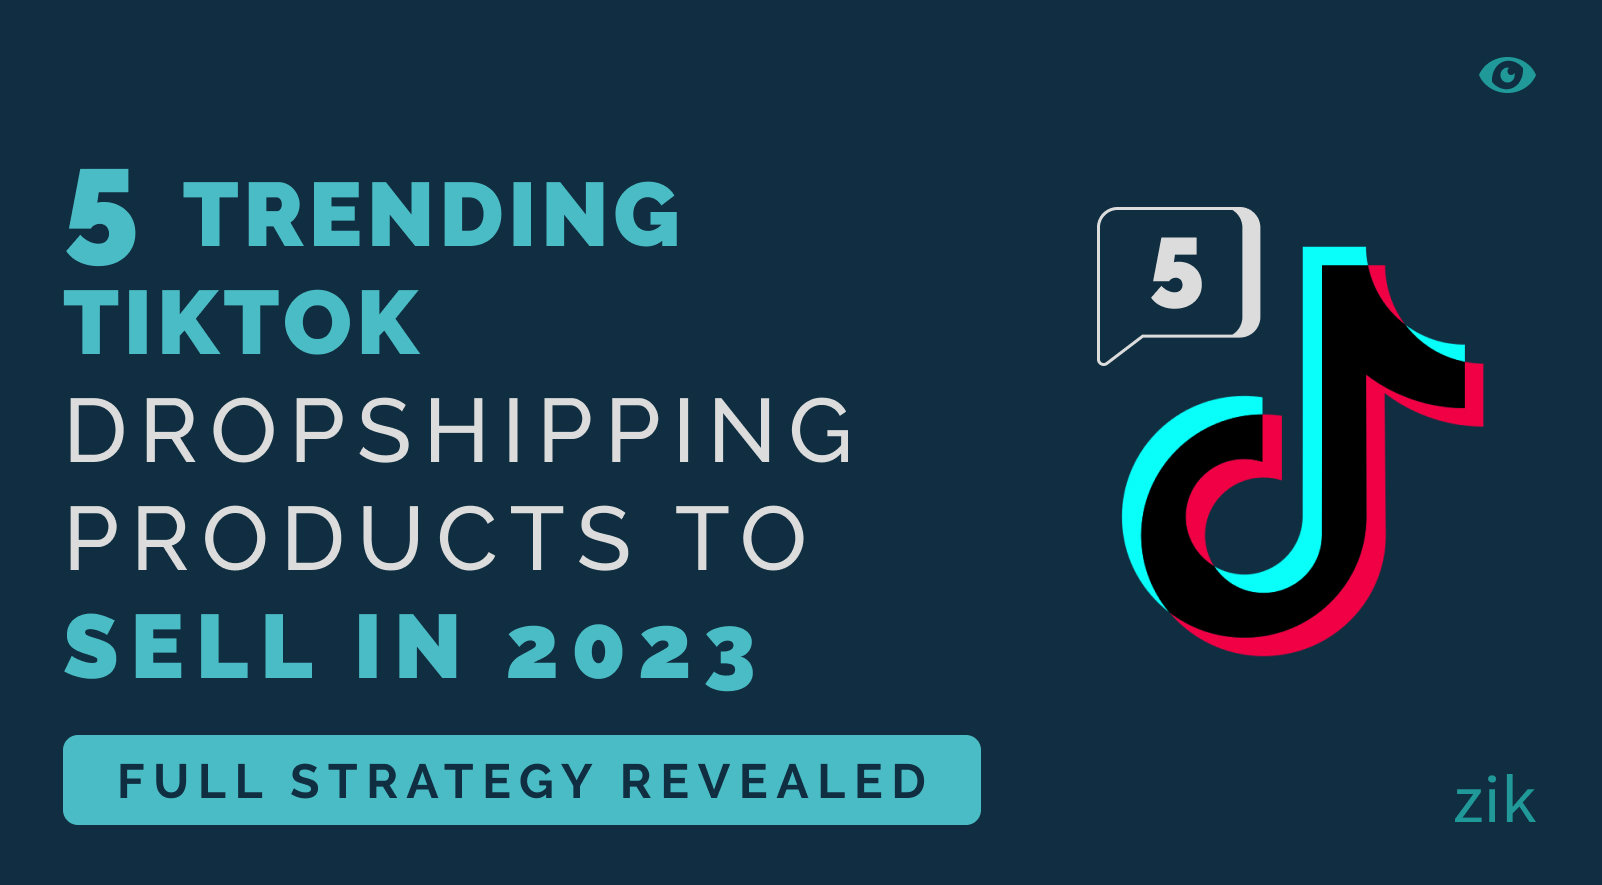 5 Trending Tiktok Dropshipping Products To Sell In 2023 Full Strategy Revealed 